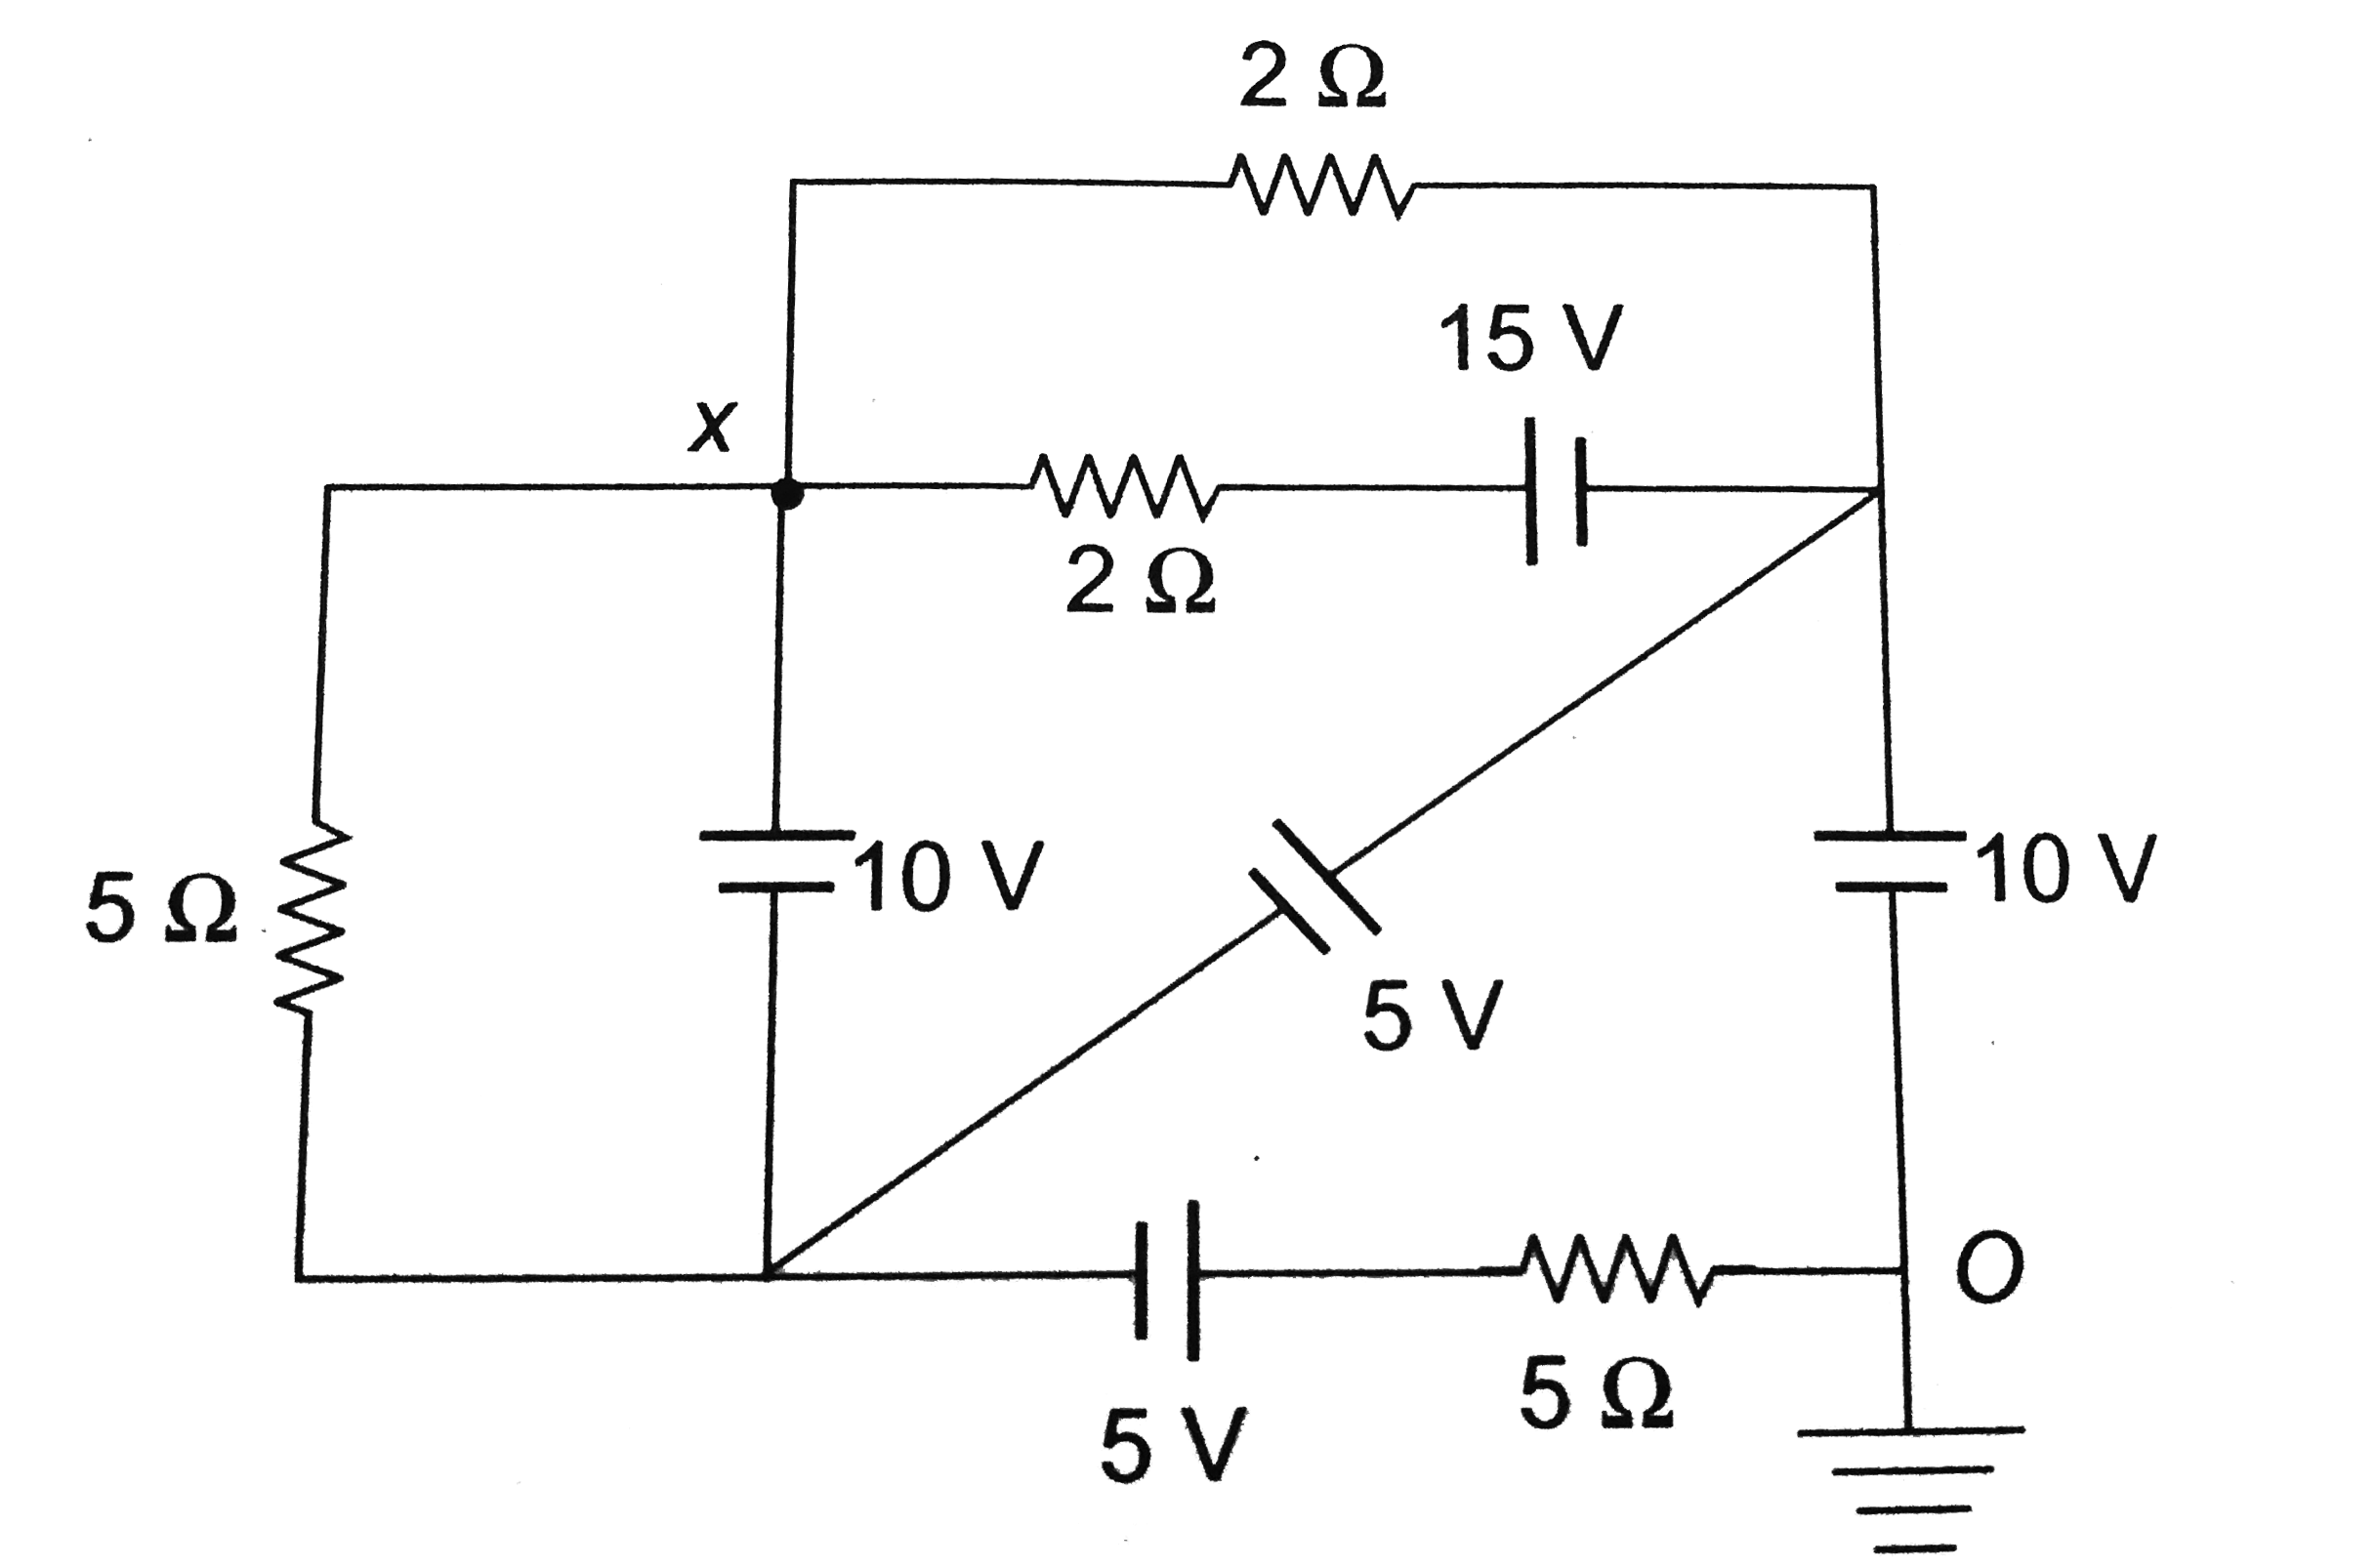 In the circuit shown if point O is earthed, the potential of point X is equal to